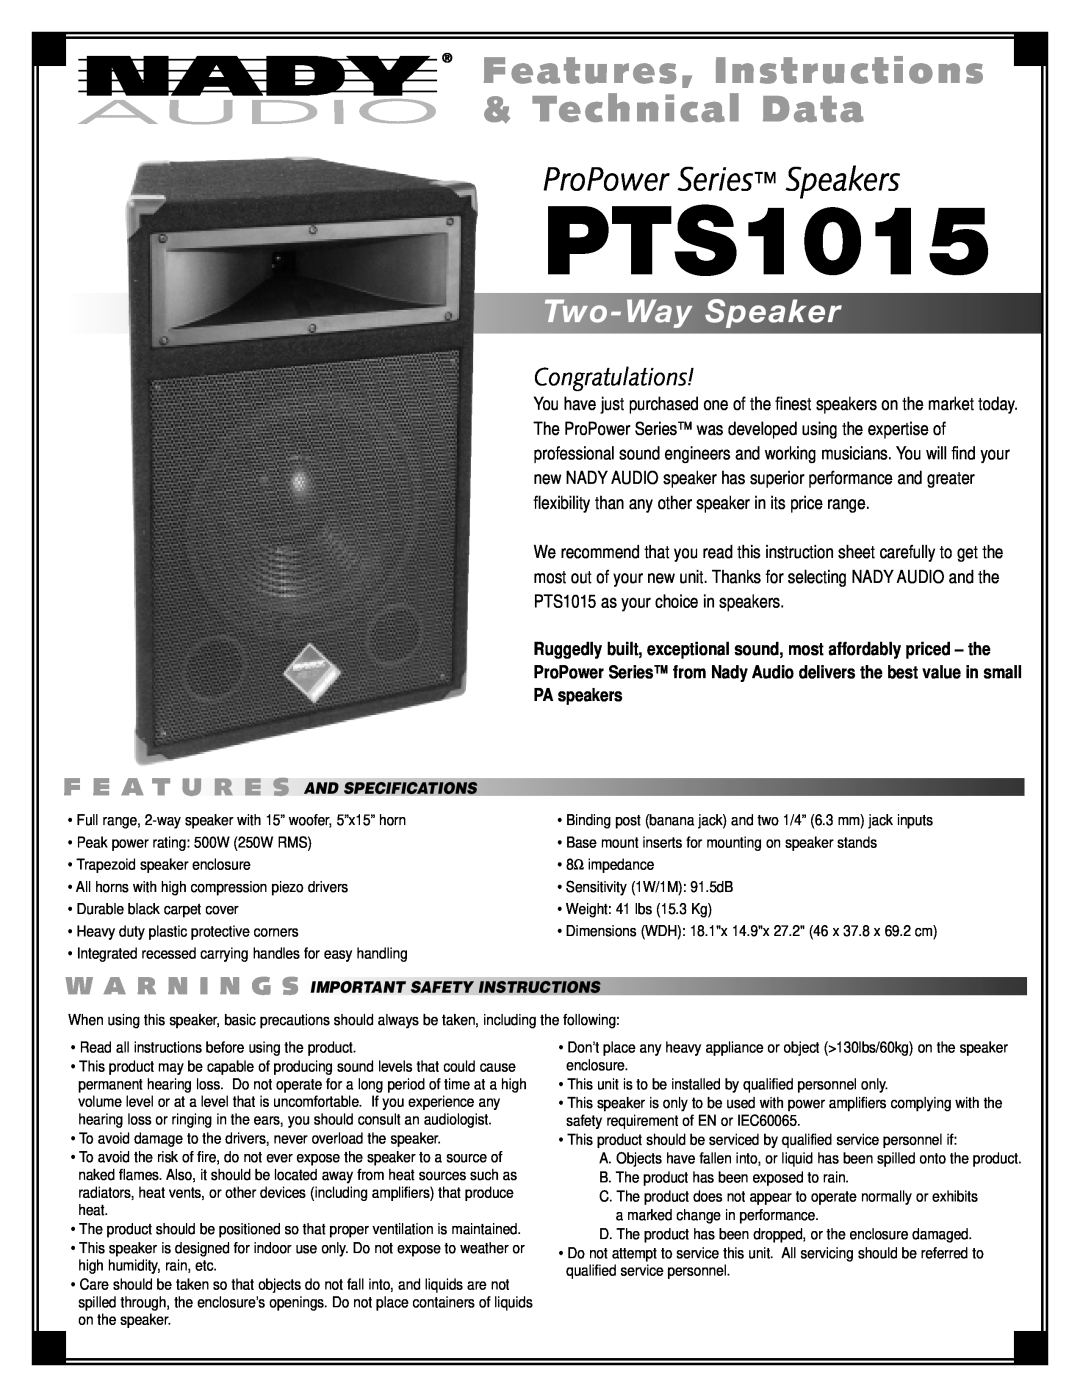 Nady Systems PTS1015 important safety instructions F E A T Ures, And Specifications, ProPower Series Speakers, PA speakers 